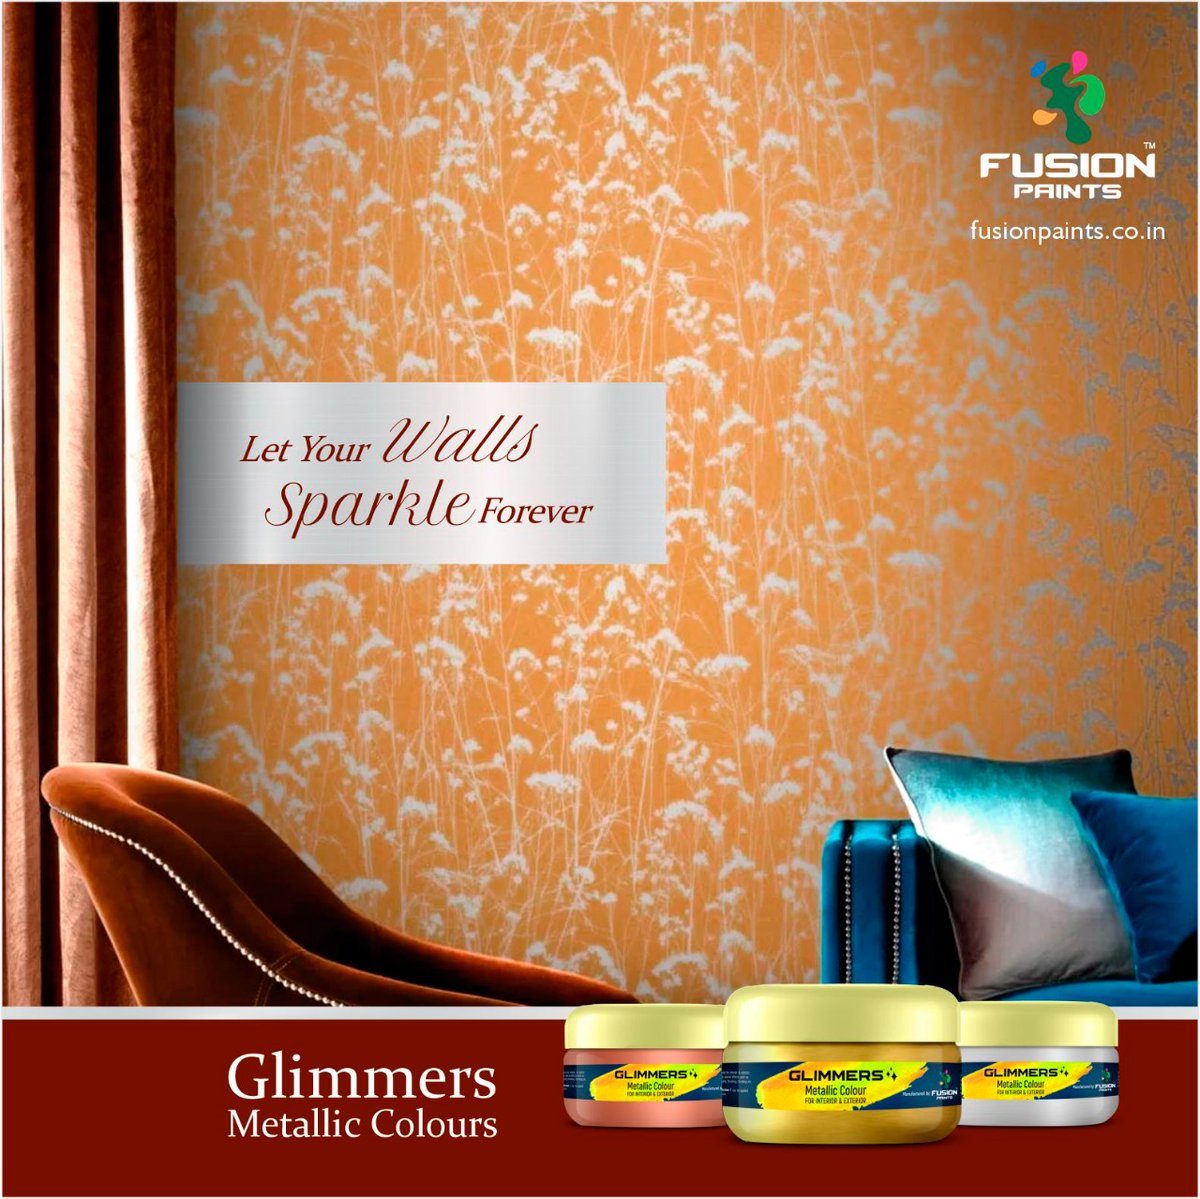 It takes just one wall
to transform the Entire Room
#ShineOn

#fusionpaints #glimmers #metallicpaints #silver #shine #ecofriendly #paint #dealer #makeinindia #colorfulwalls #wallpaint #home #house #homedecor #homepainting #silkfinish #beautiful #colors #interiorpaint